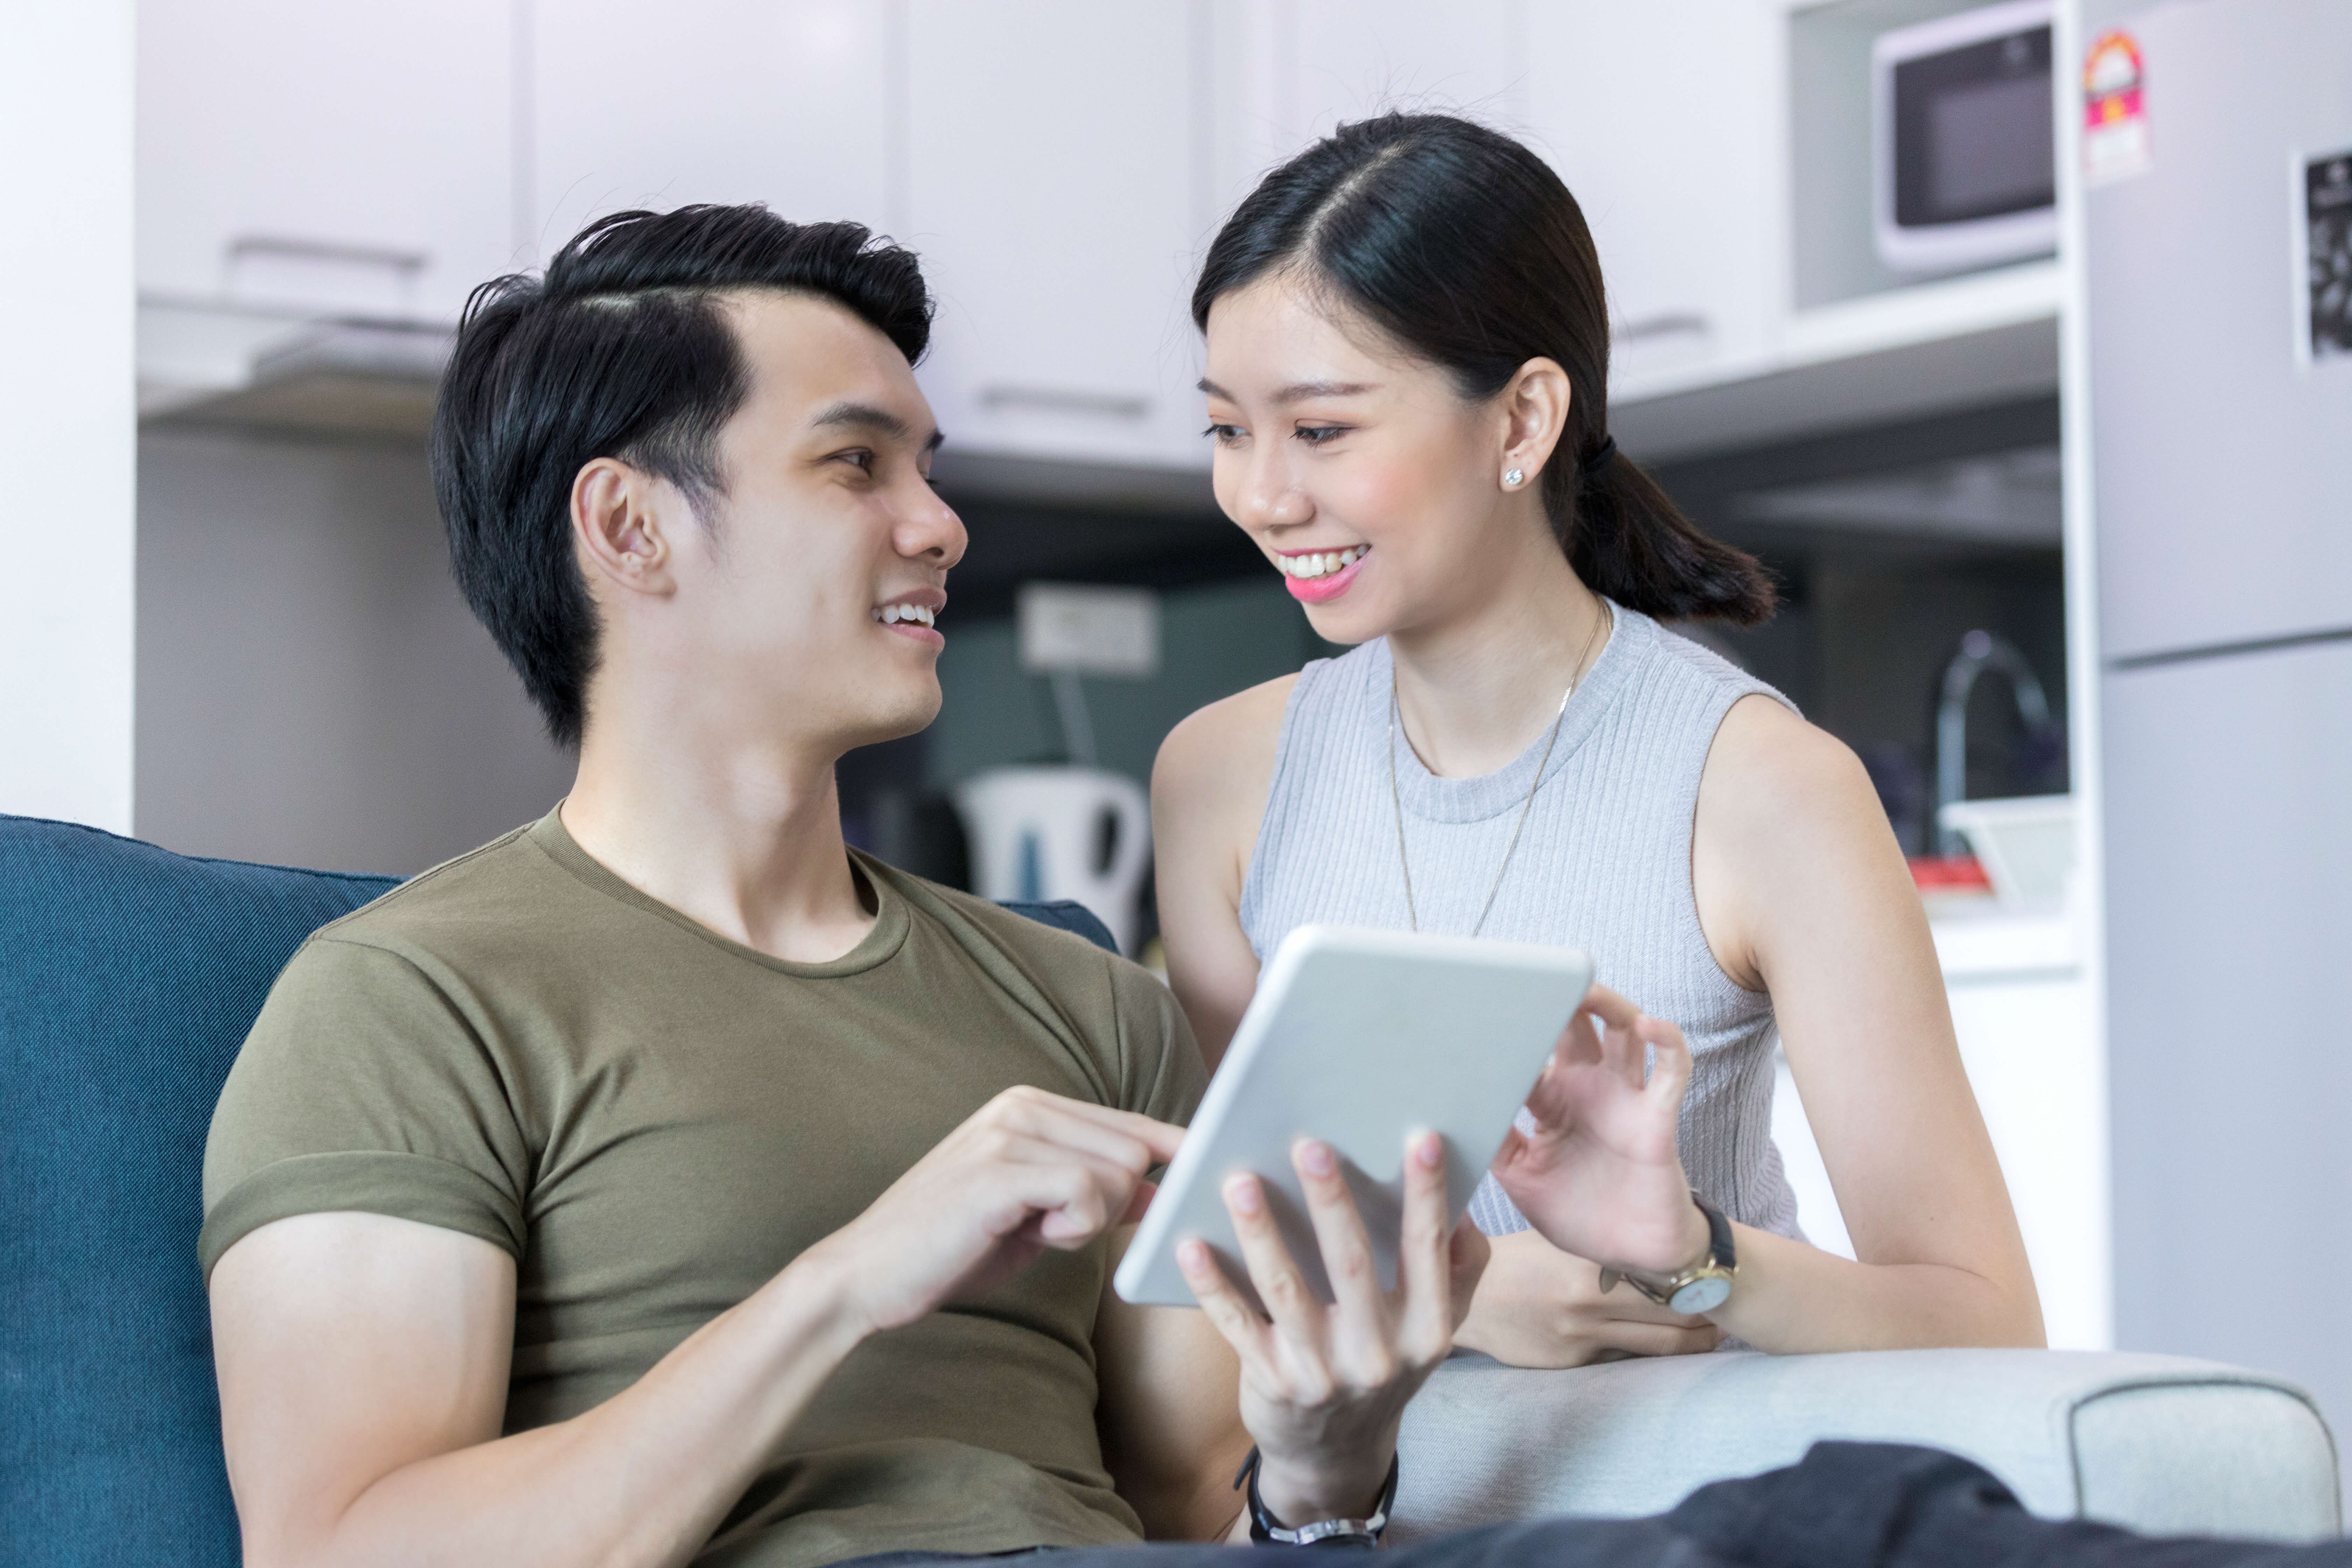 8 ways to make your home loan more affordable |DBS Singapore